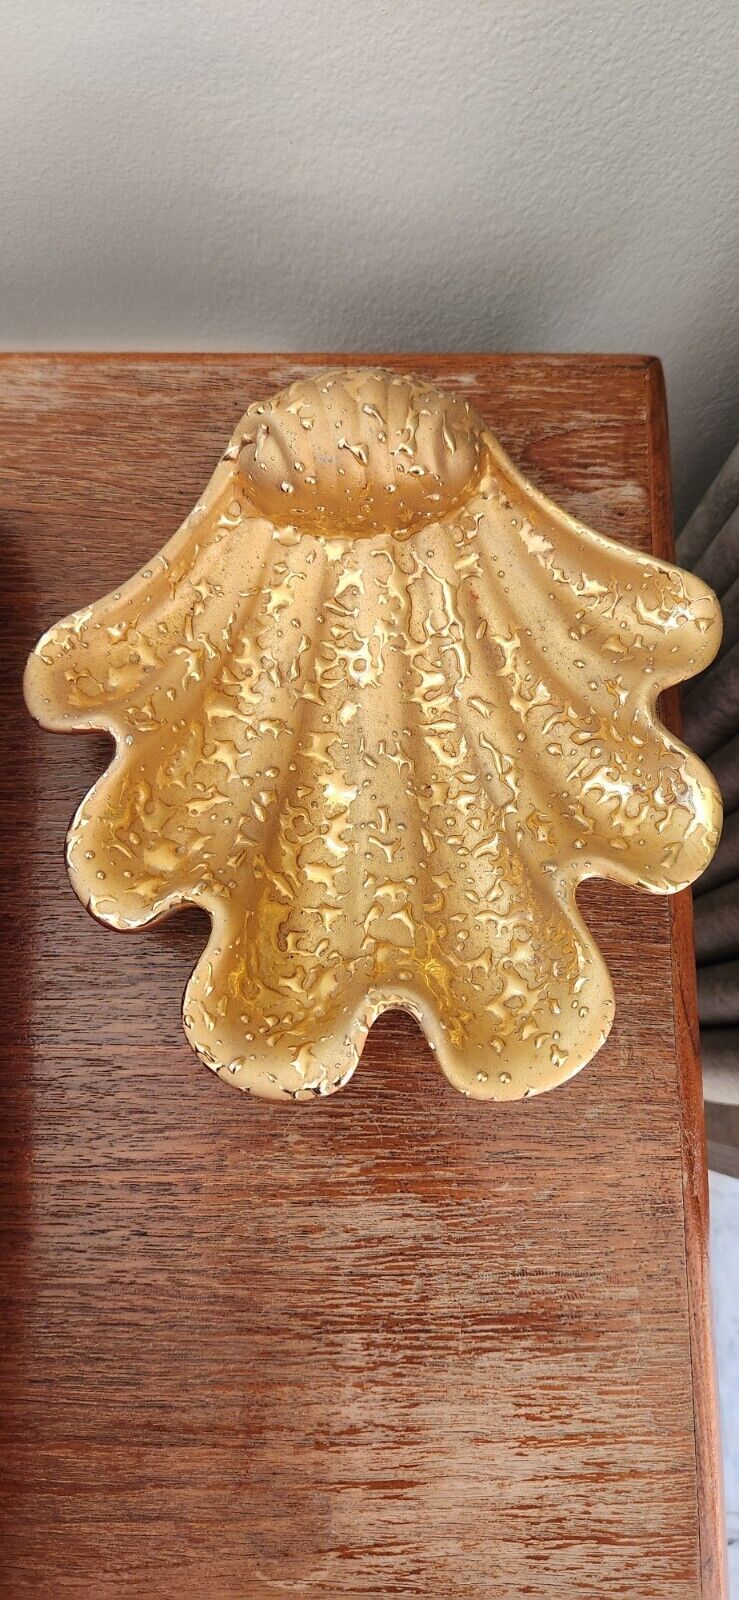 22 K Weeping Bright Gold Seashell Great Condition Lovely